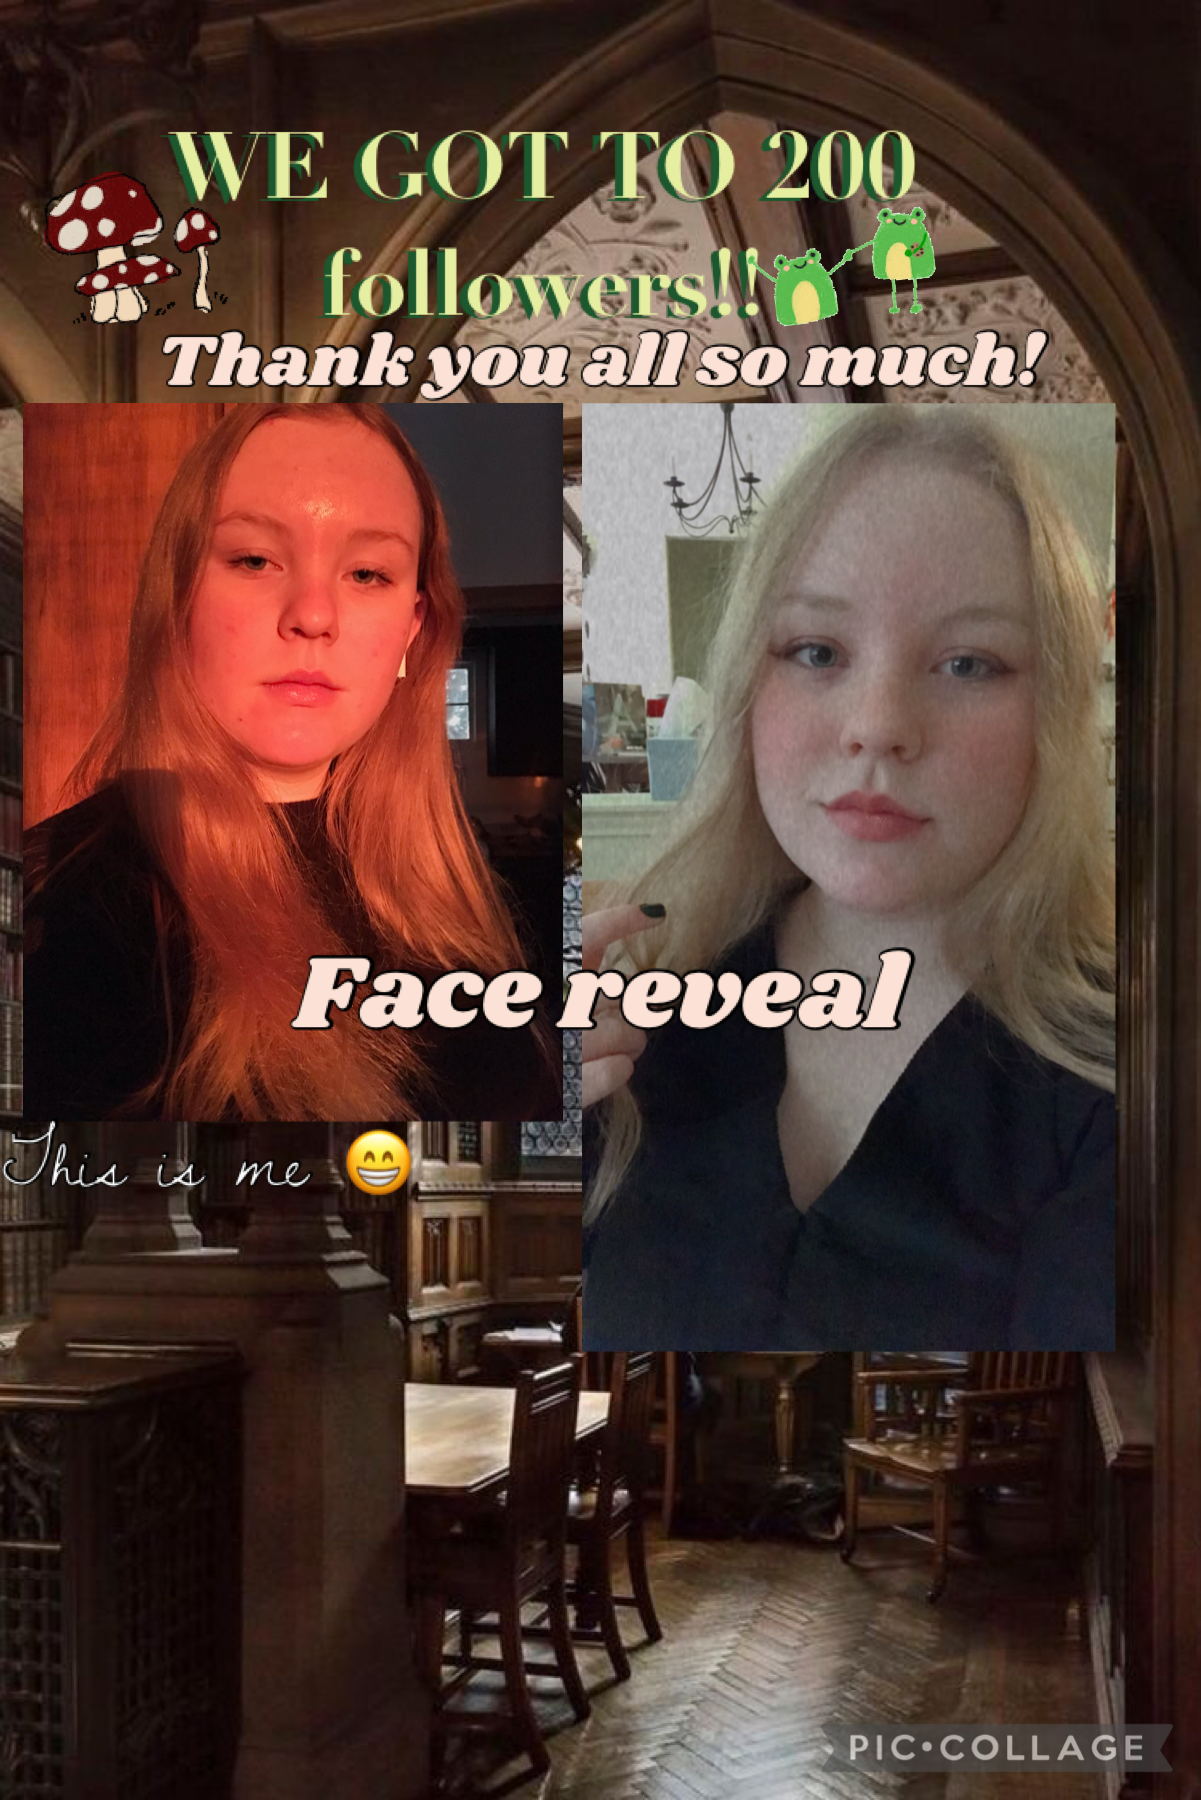      🥳Tap🥳 
Thank y’all so much!!  Everyone has been so kind 😊 sorry I haven’t been on here lately I had a health scare with my lungs, and I’ve been at the doctors 24/7 but I’m ok now and feeling better! I hope you enjoy the face reveal! Lots of love ❤️ 